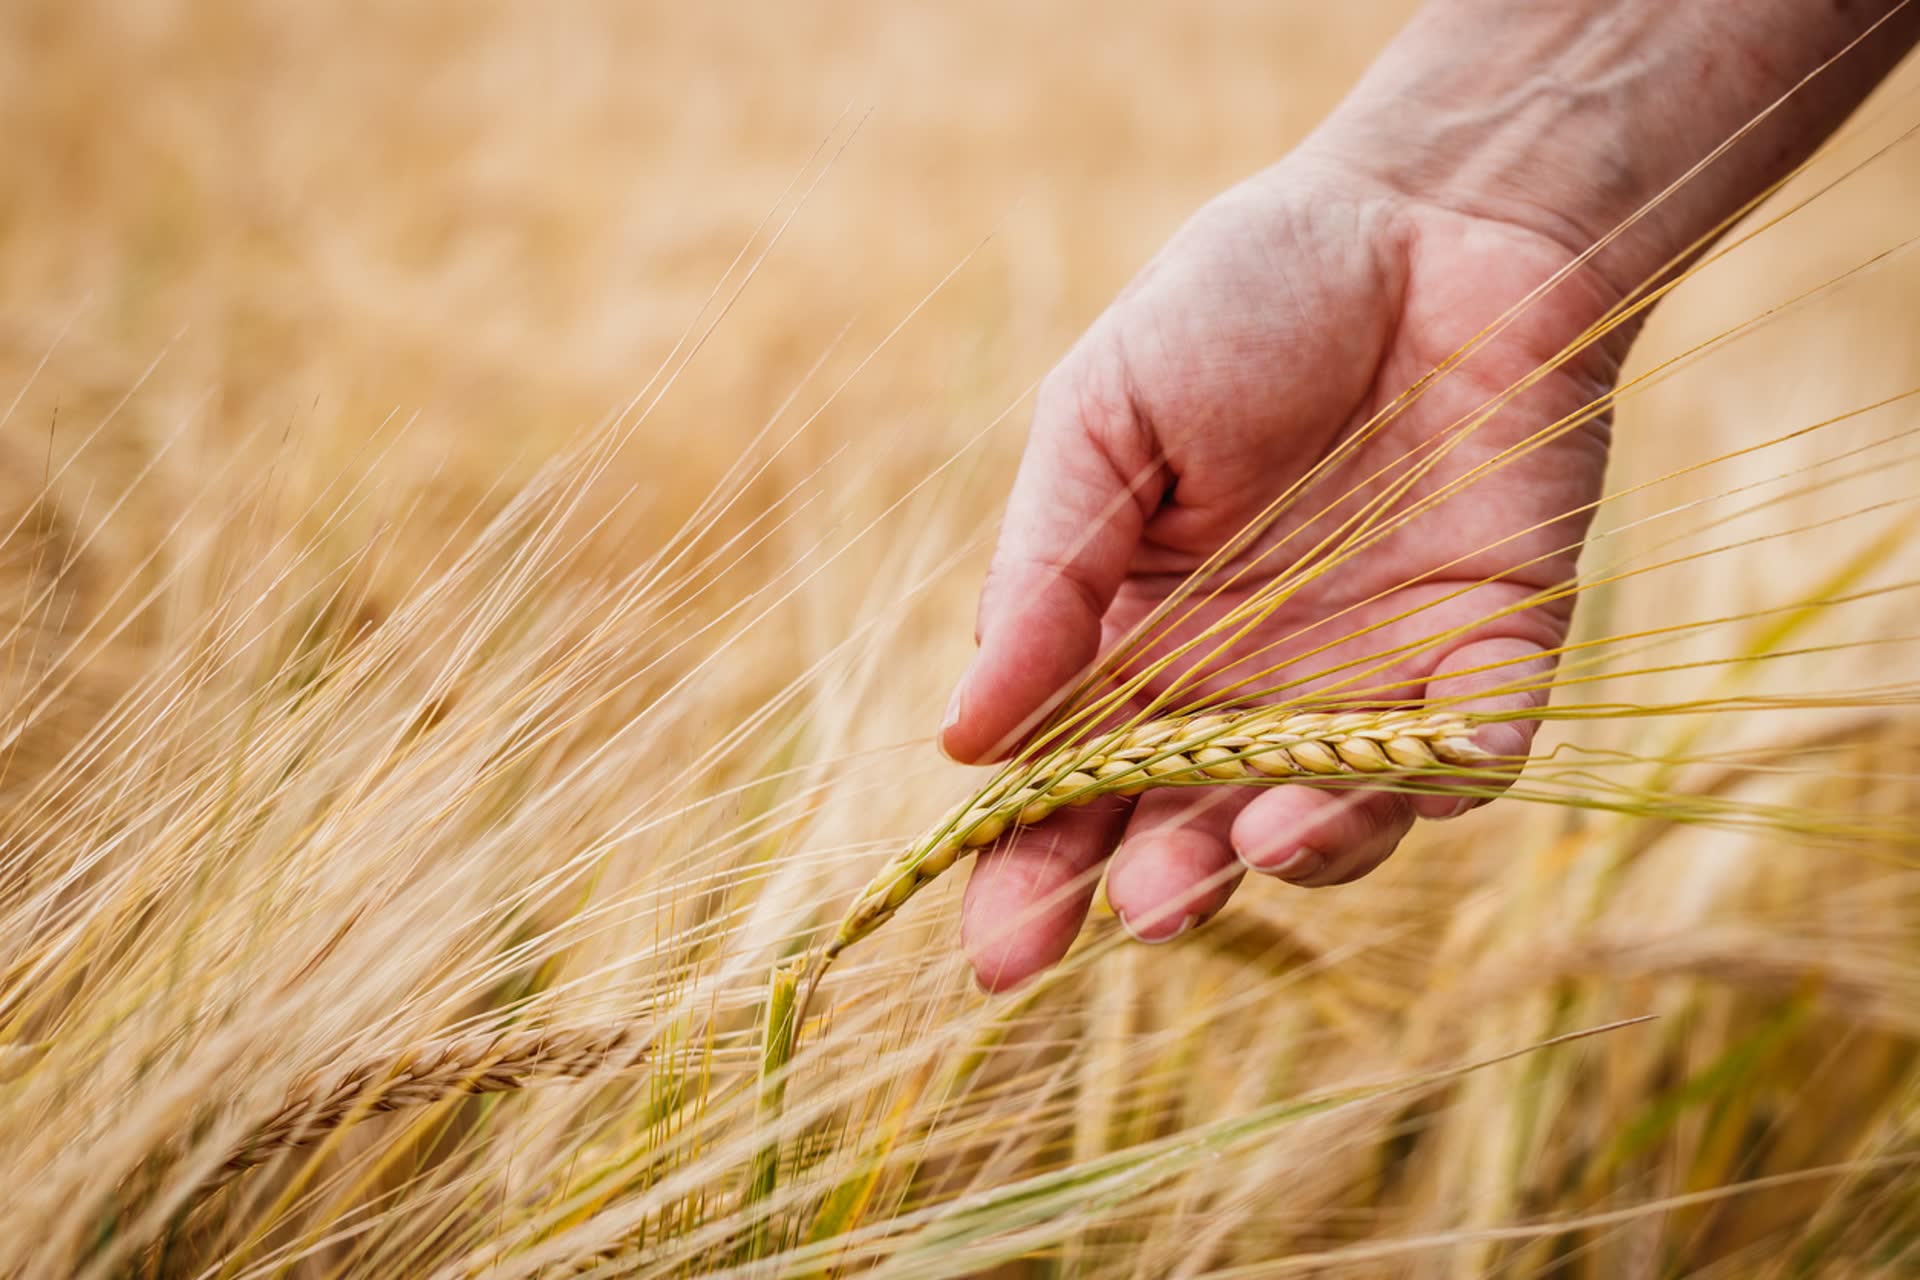 Malteries Soufflet and Heineken: together for the development of low-carbon barley production.